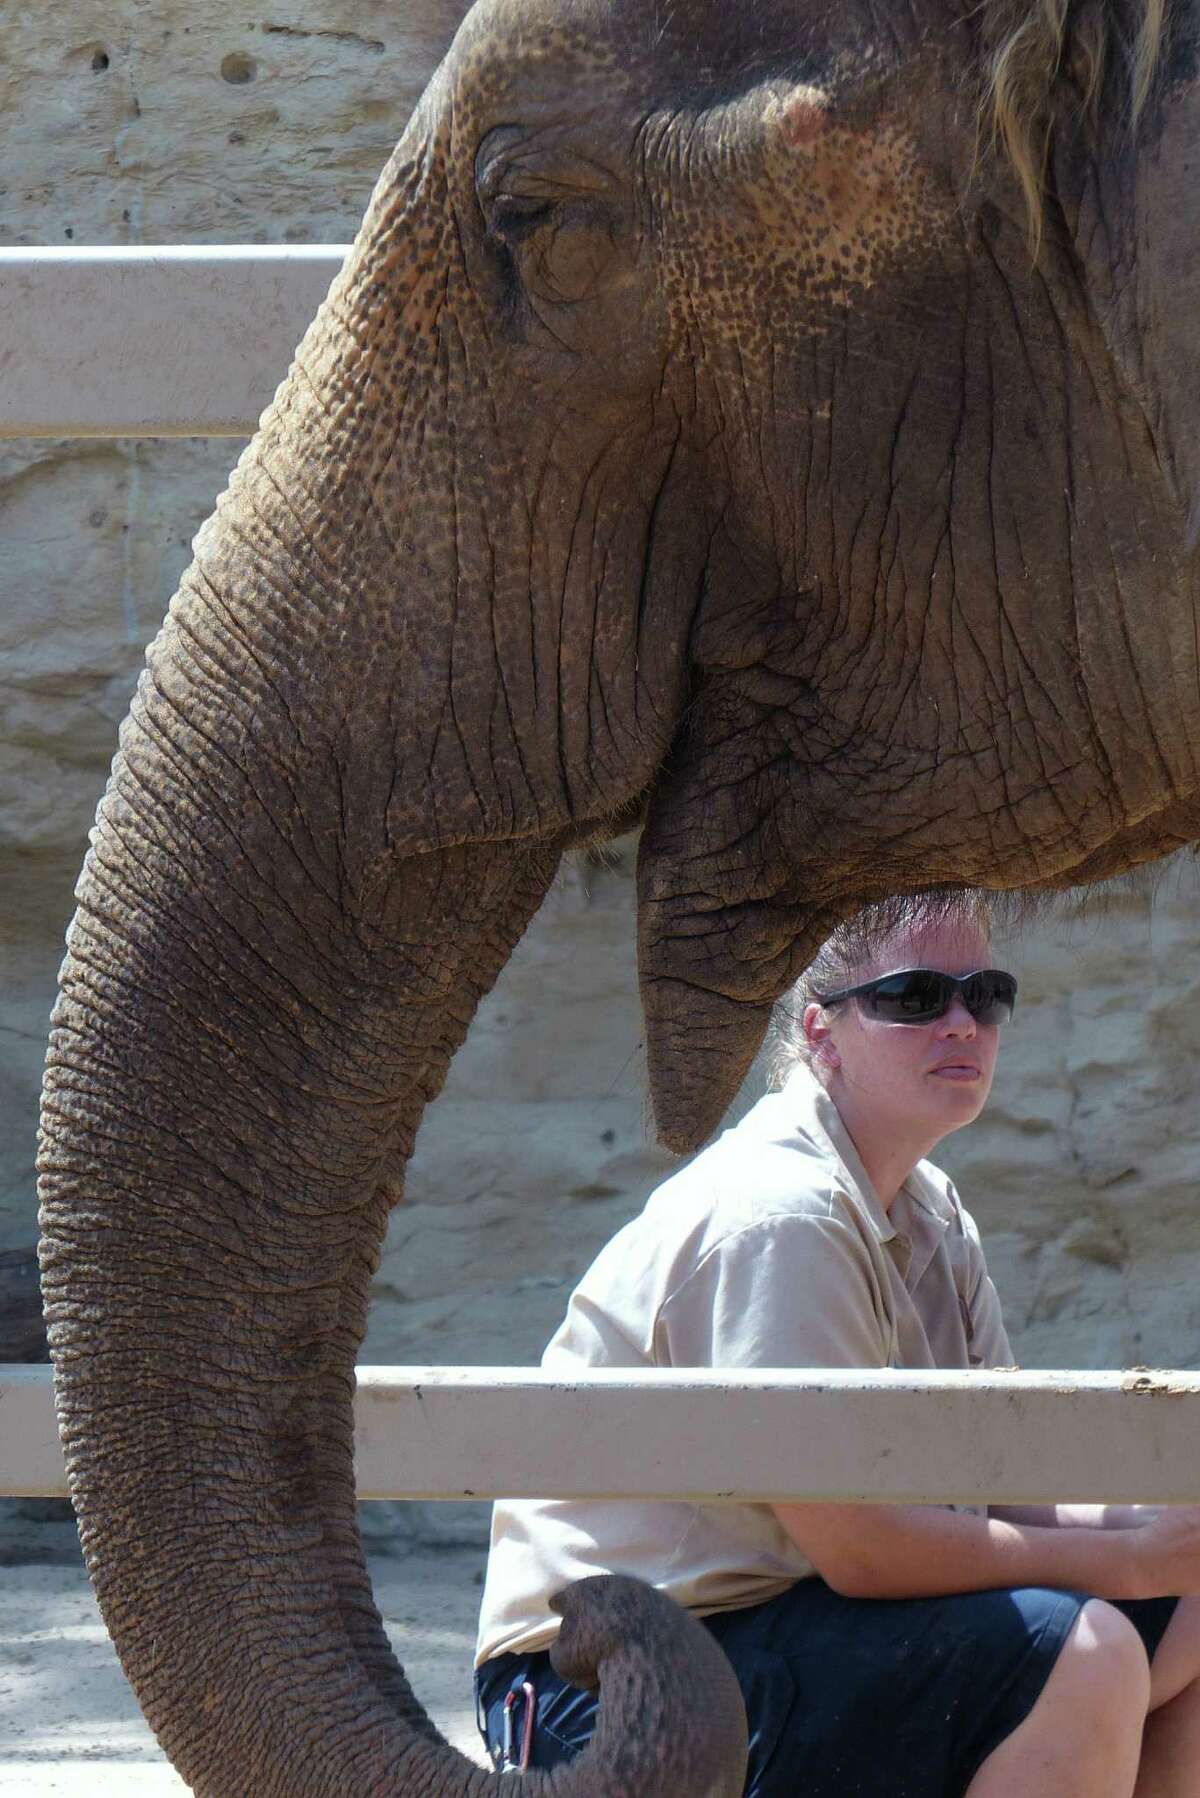 Lucky, the San Antonio zoo's Asian elephant, is attended to by zookeeper Naomi Tyndall on Tuesday, March 19, 2013, days after her companion elephant, Boo, died.